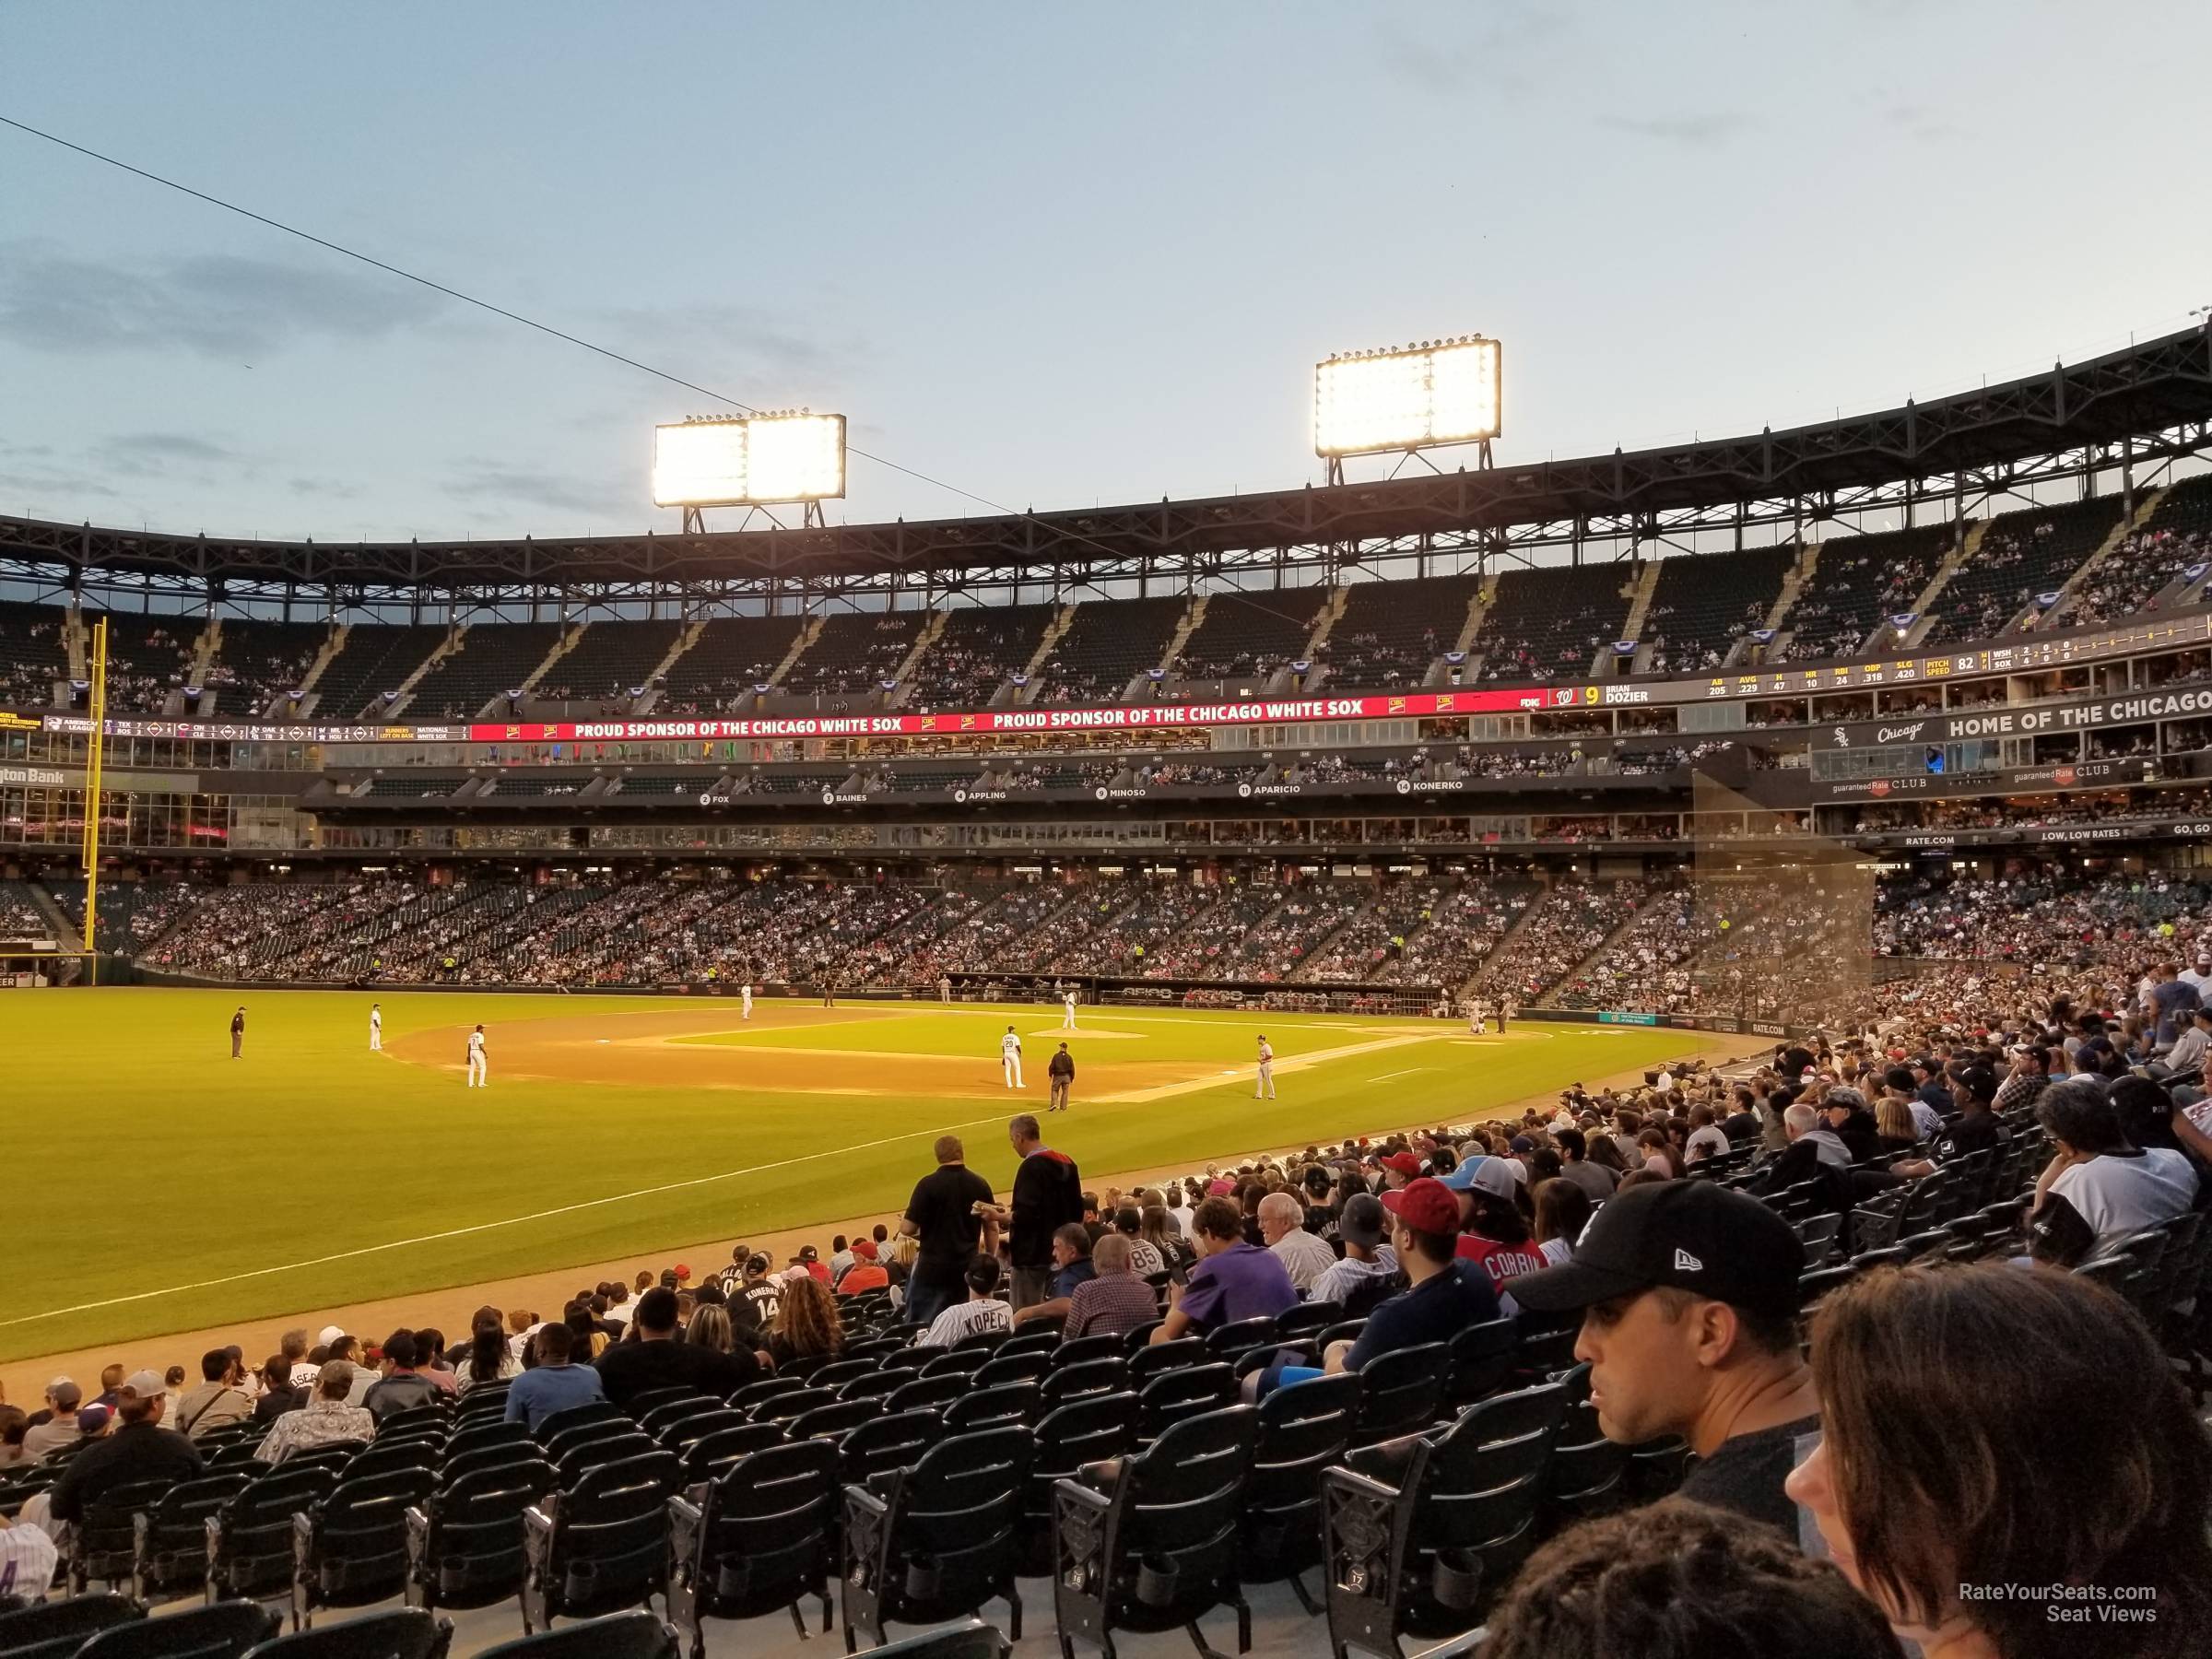 section 150, row 20 seat view  - guaranteed rate field